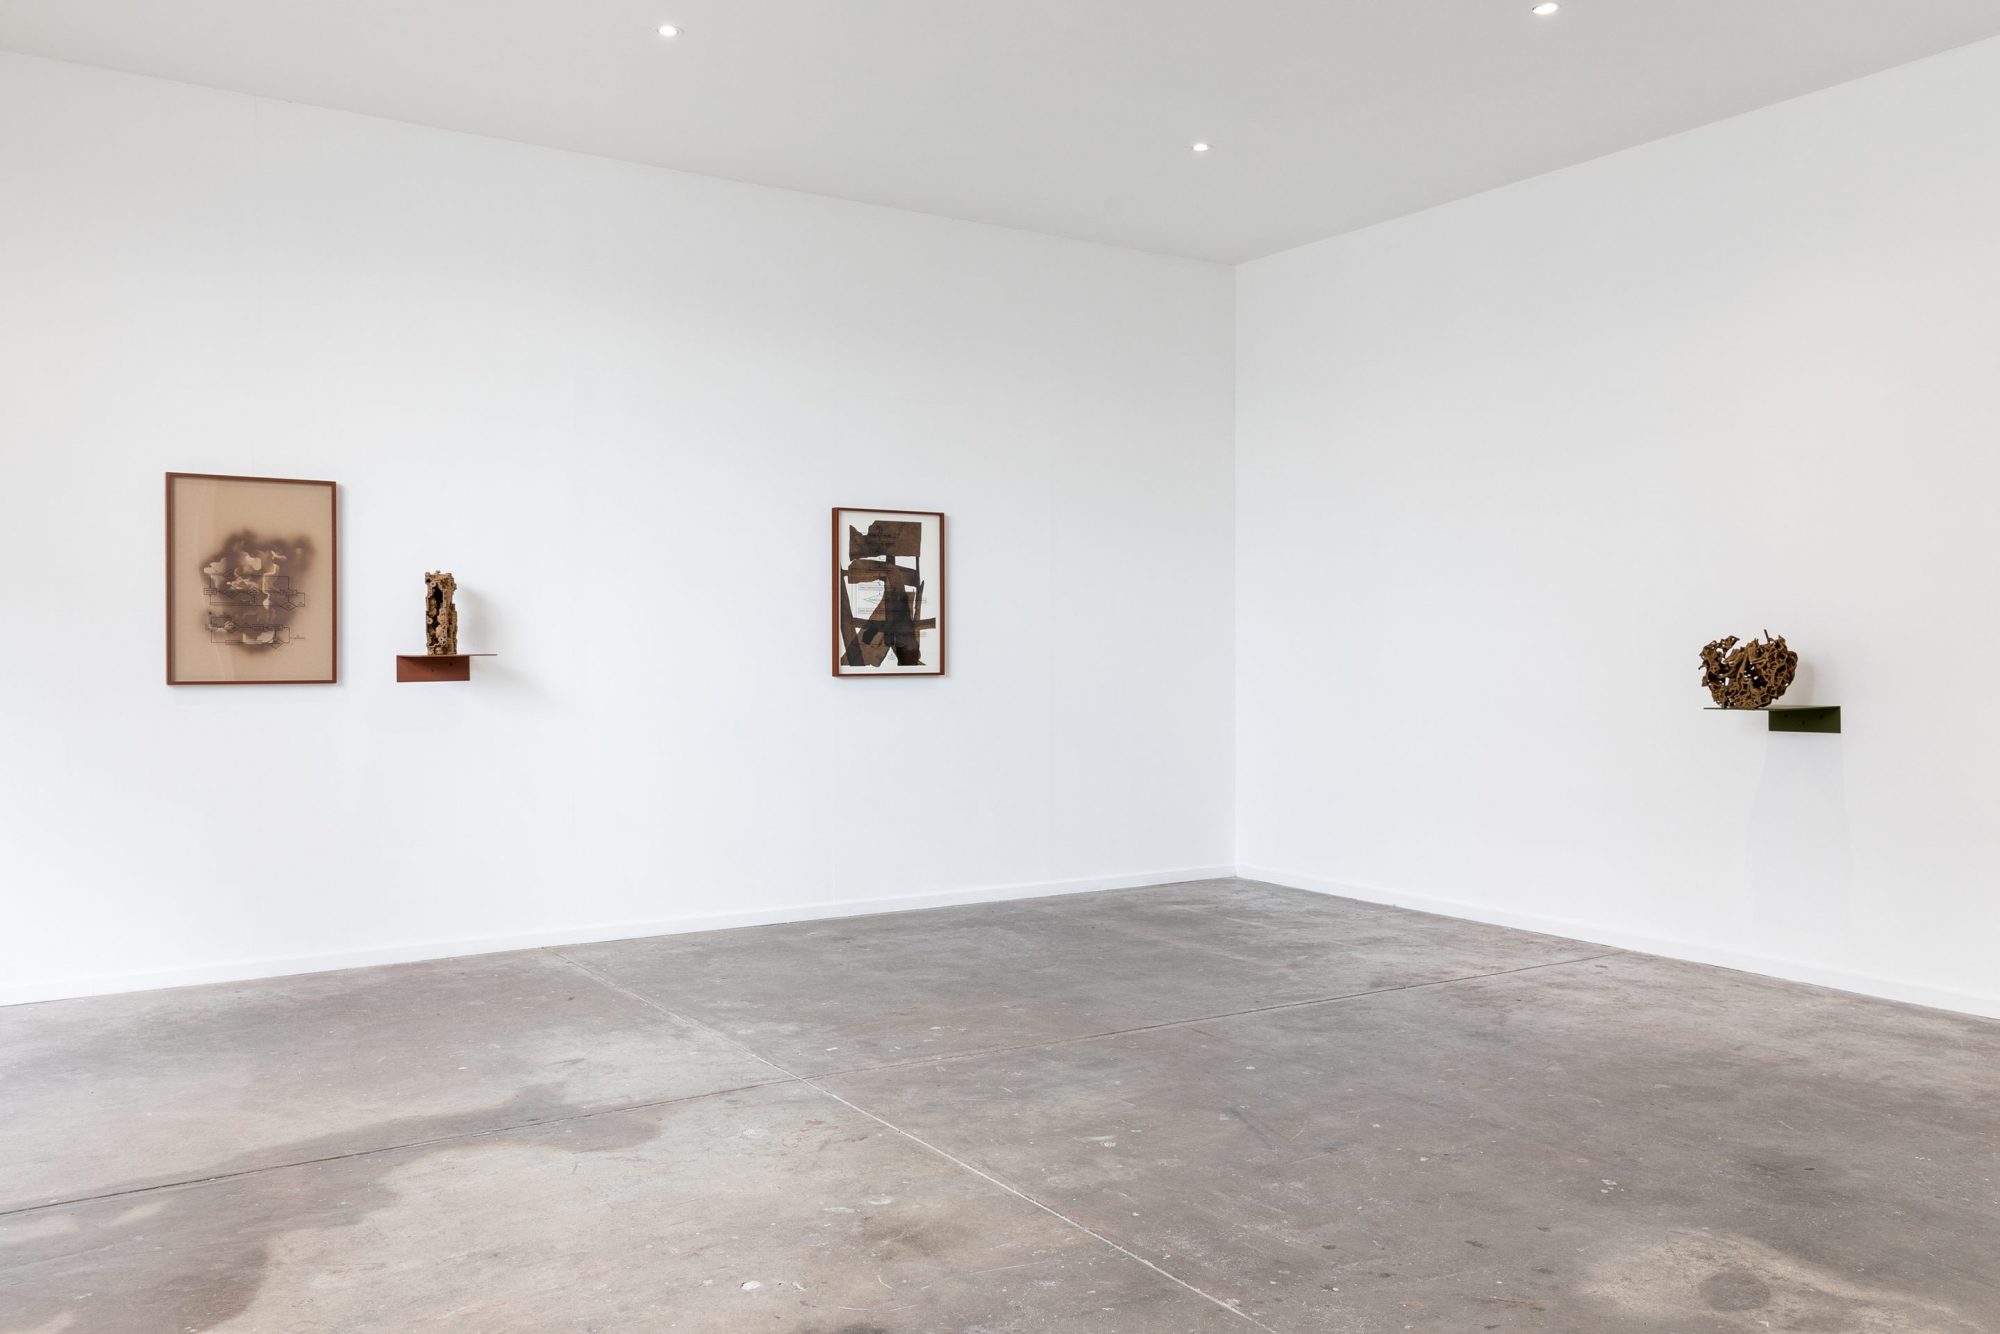 Nicholas Mangan, Termite Economies (Neural Nodes and Root Causes), 2020, Installation view. Photography: Andrew Curtis.